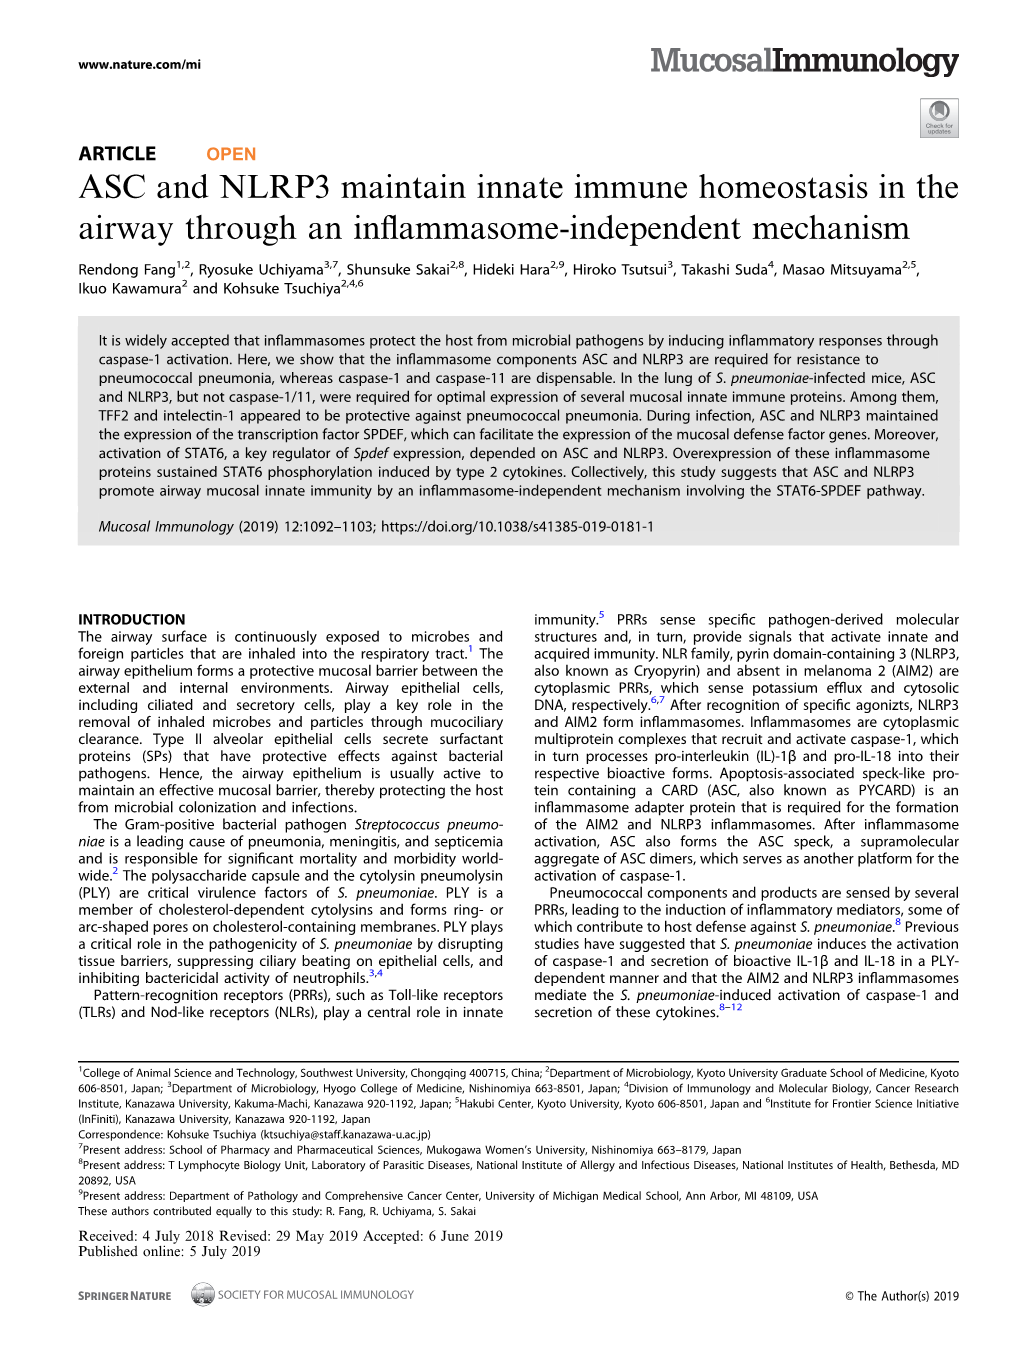 ASC and NLRP3 Maintain Innate Immune Homeostasis in the Airway Through an Inflammasome-Independent Mechanism